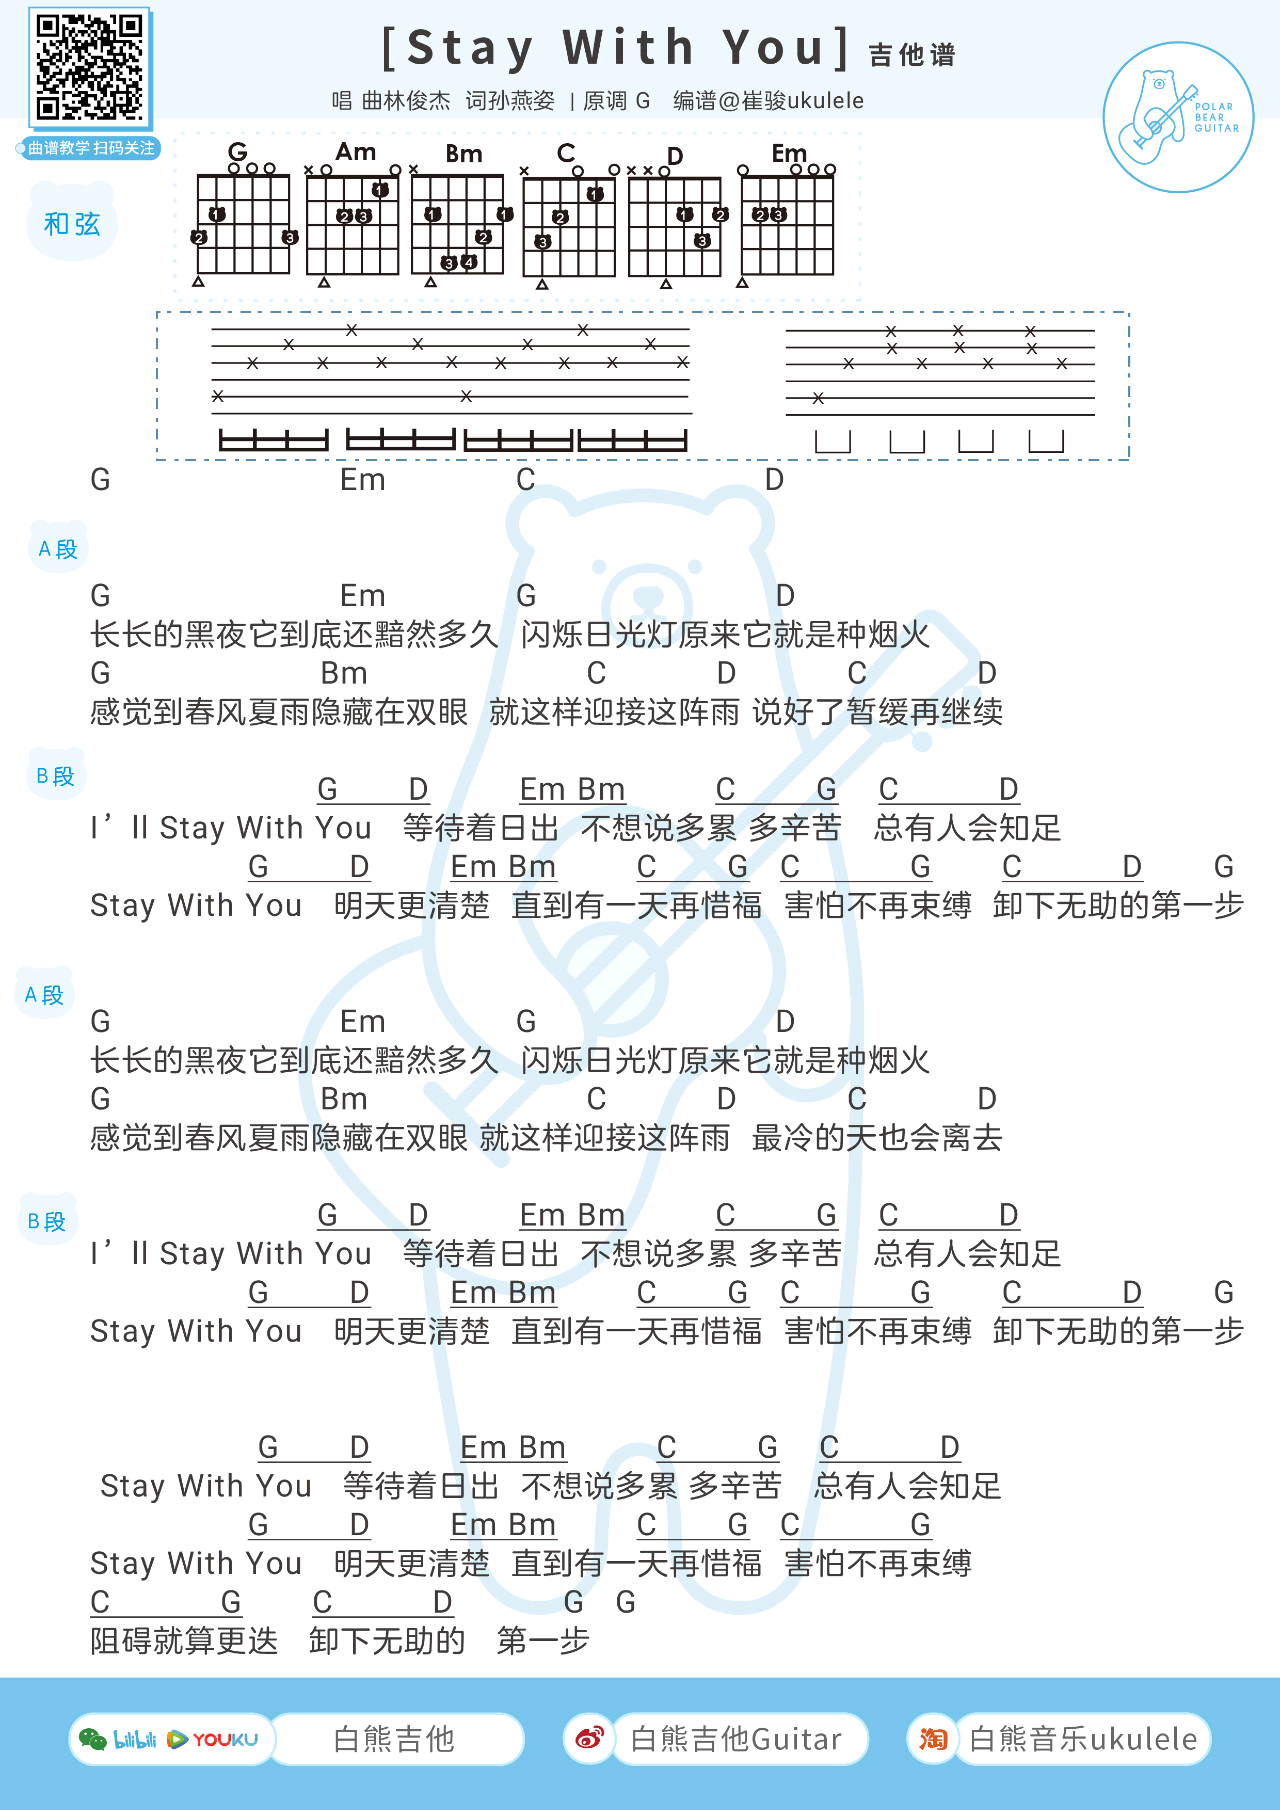 Stay_With_You吉他谱_林俊杰/孙燕姿_弹唱图片谱